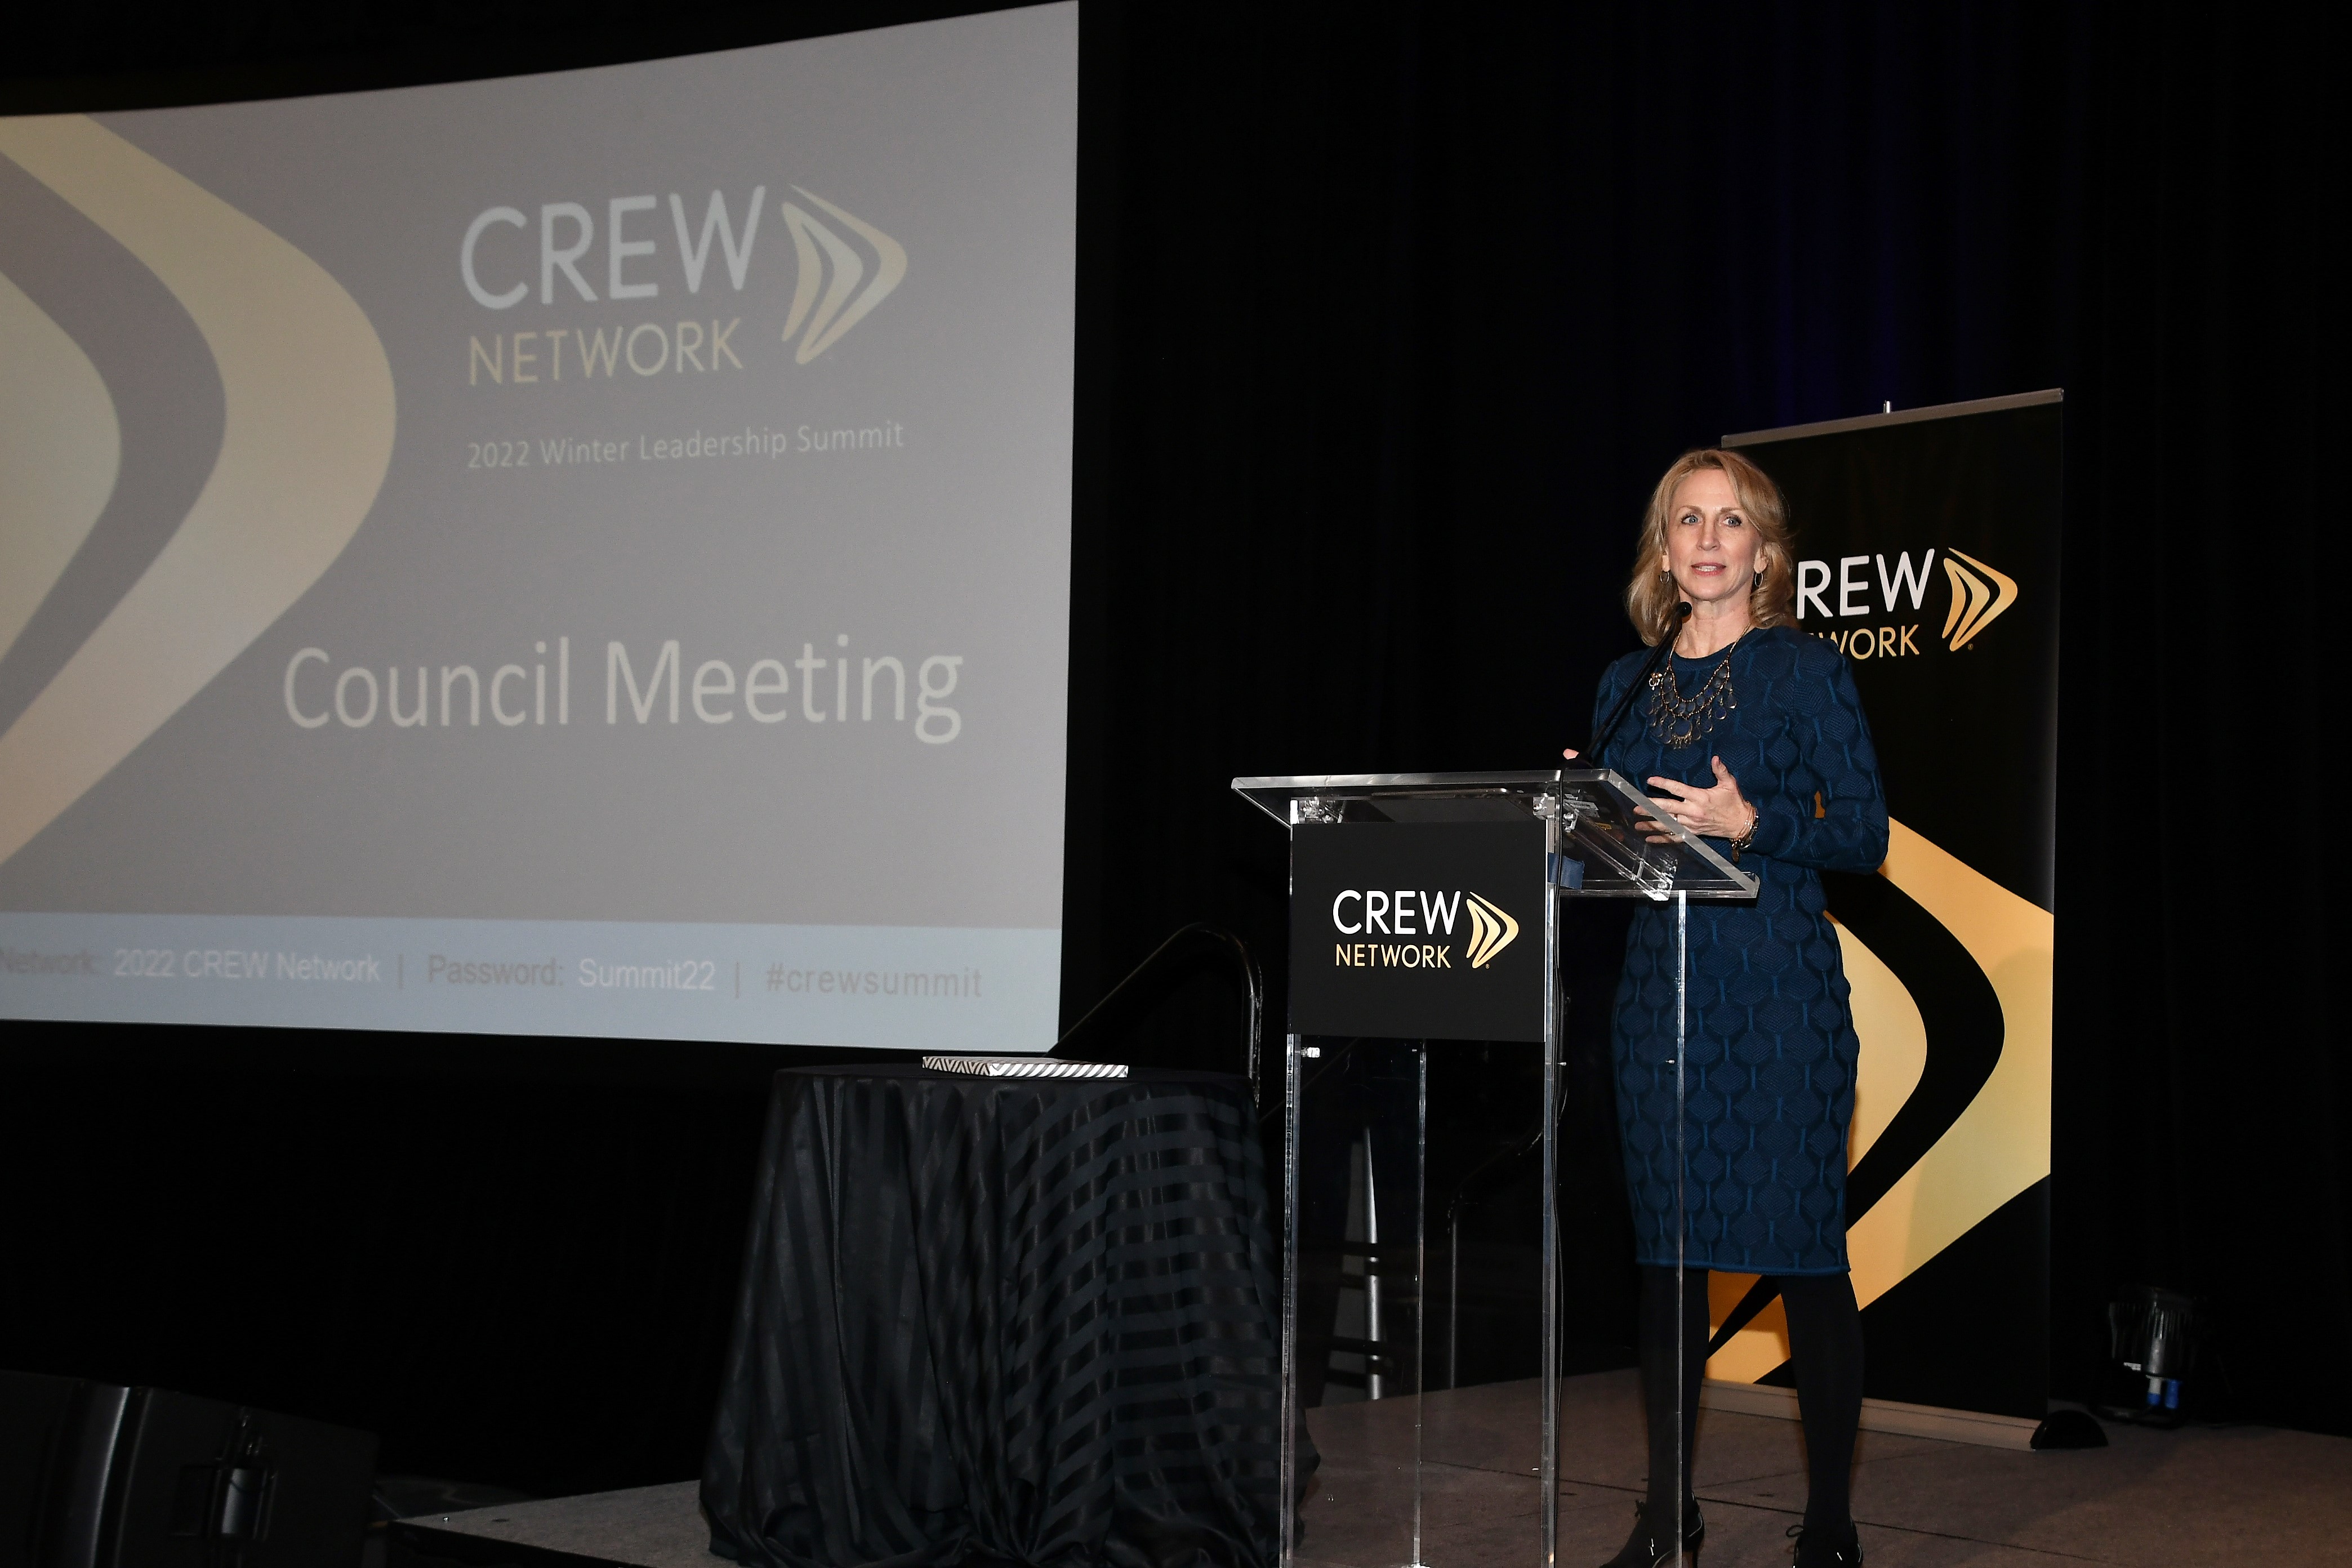 Woman speaking at a glass podium at a CREW Network summit